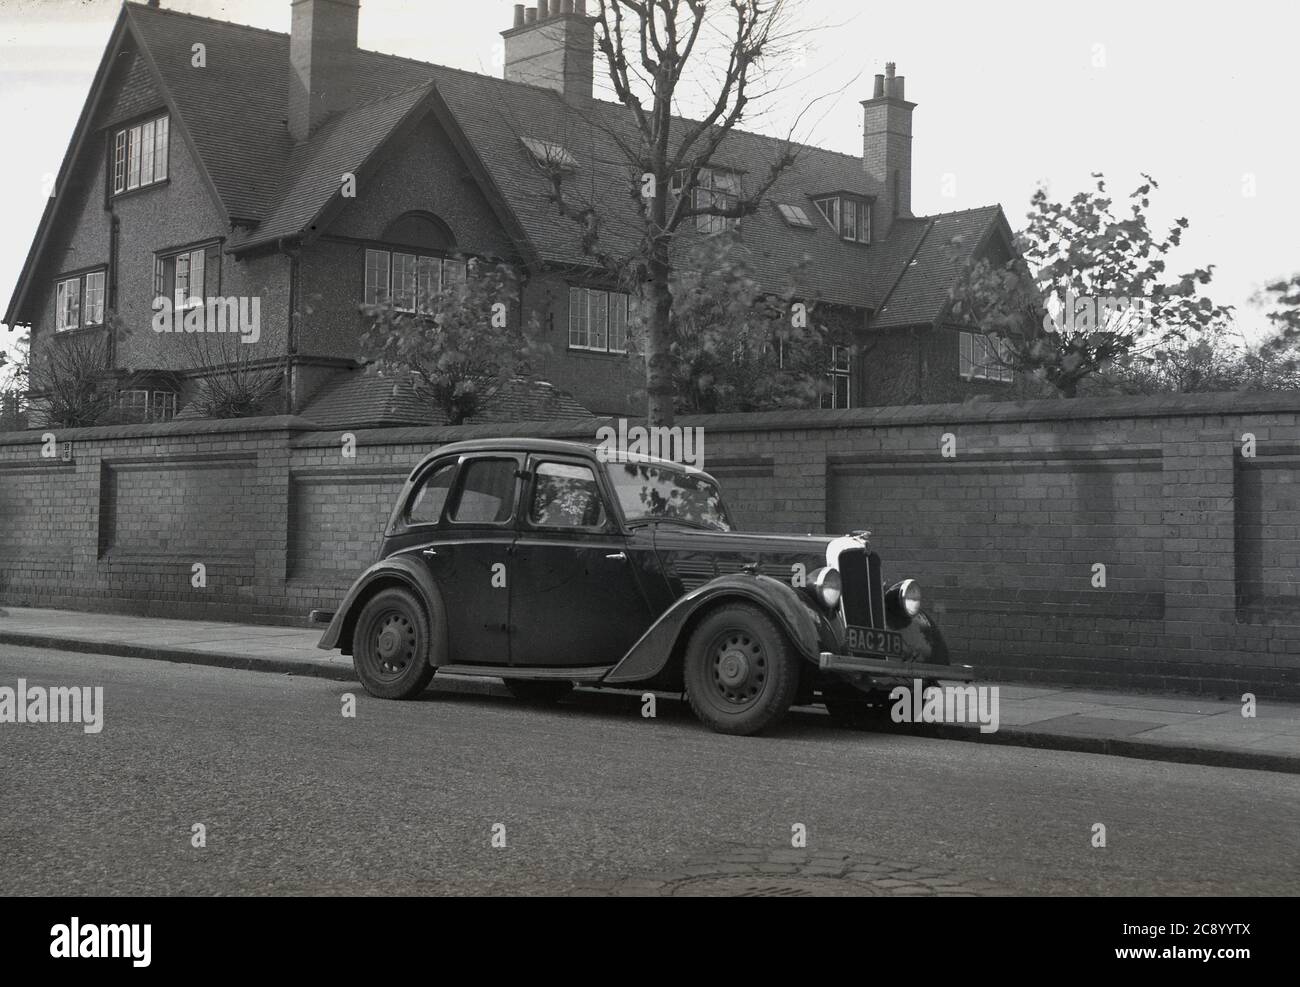 Circa 1940s, historical, a 4-door motorcar of the era, with its doors hinged in the middle, parked in a street beside a high brick wall surrounding a very large three-storey house with pebble-dash exterior, arts and craft in style, dating from the late 19th century, England, UK. The Arts and Crafts movement embraced architecture as a way to revive craftsmanship and individuality. Stock Photo